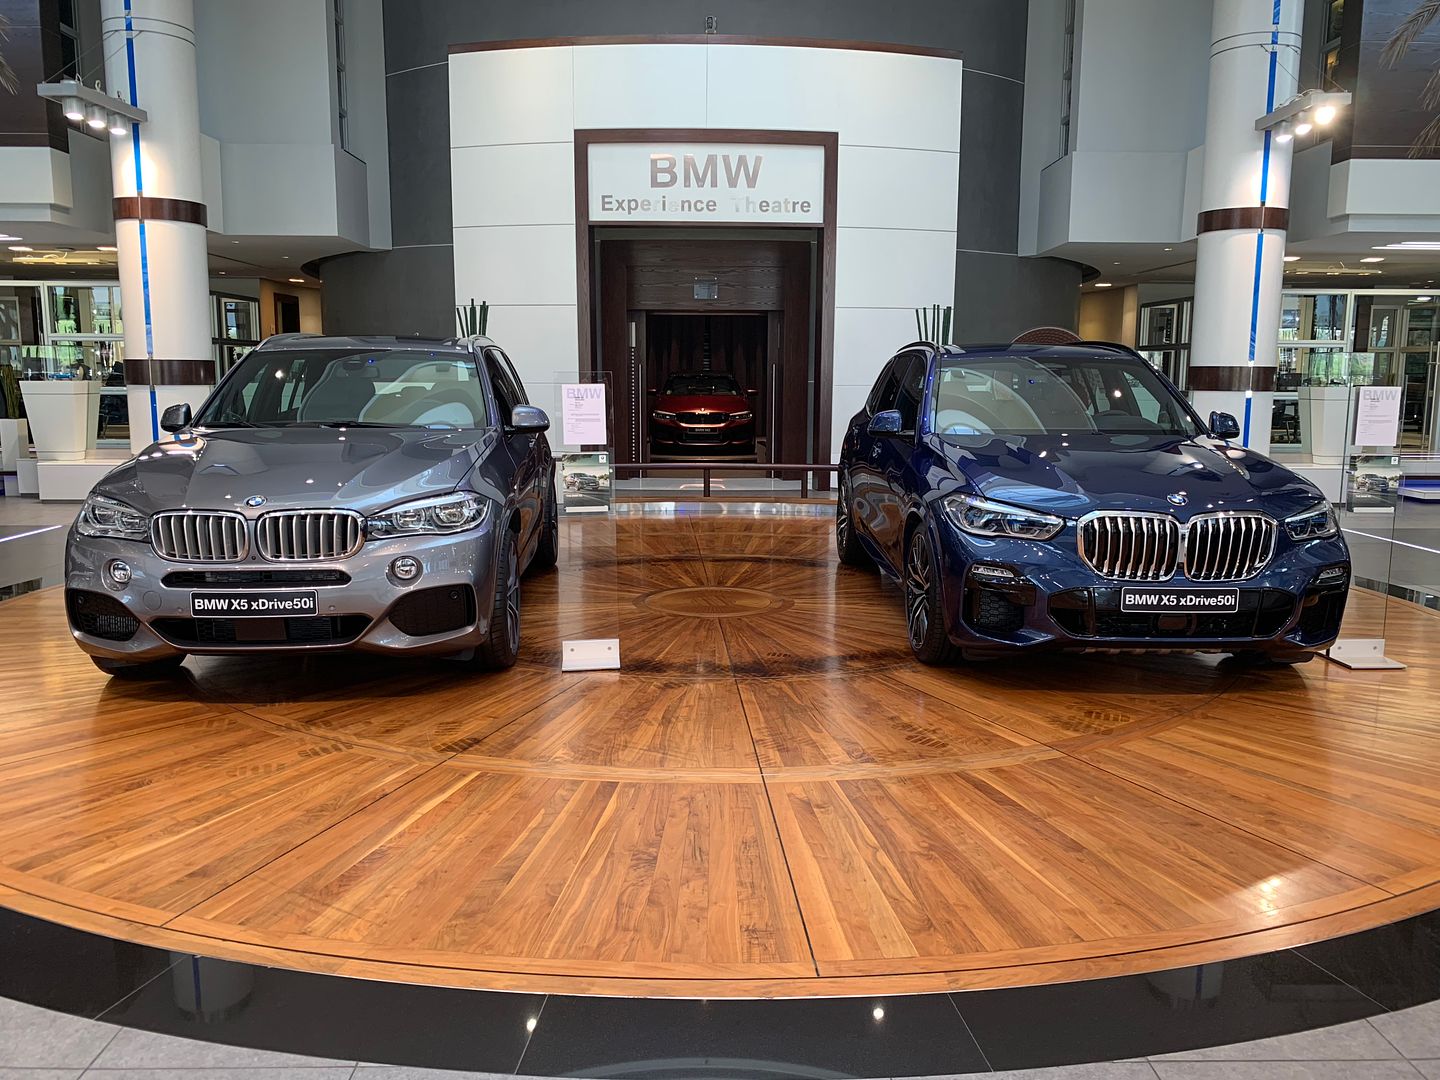 Pics and observations: 2019 X5 (G05) and 2018 X5 (F15) - BMW X5 Forum (G05)